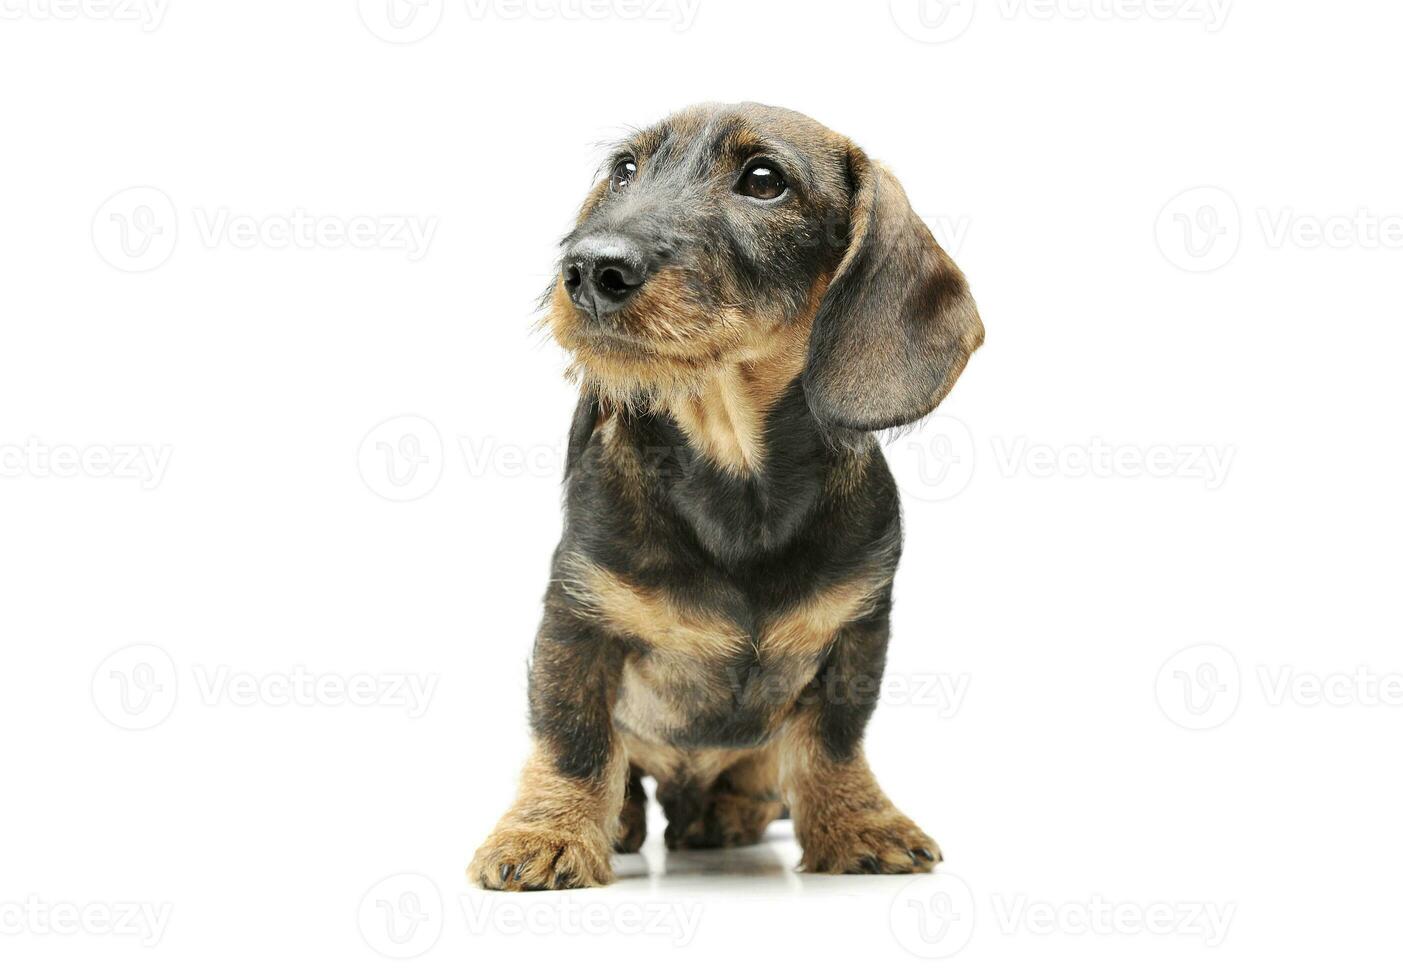 Studio shot of an adorable wired haired Dachshund sitting and looking up curiously photo